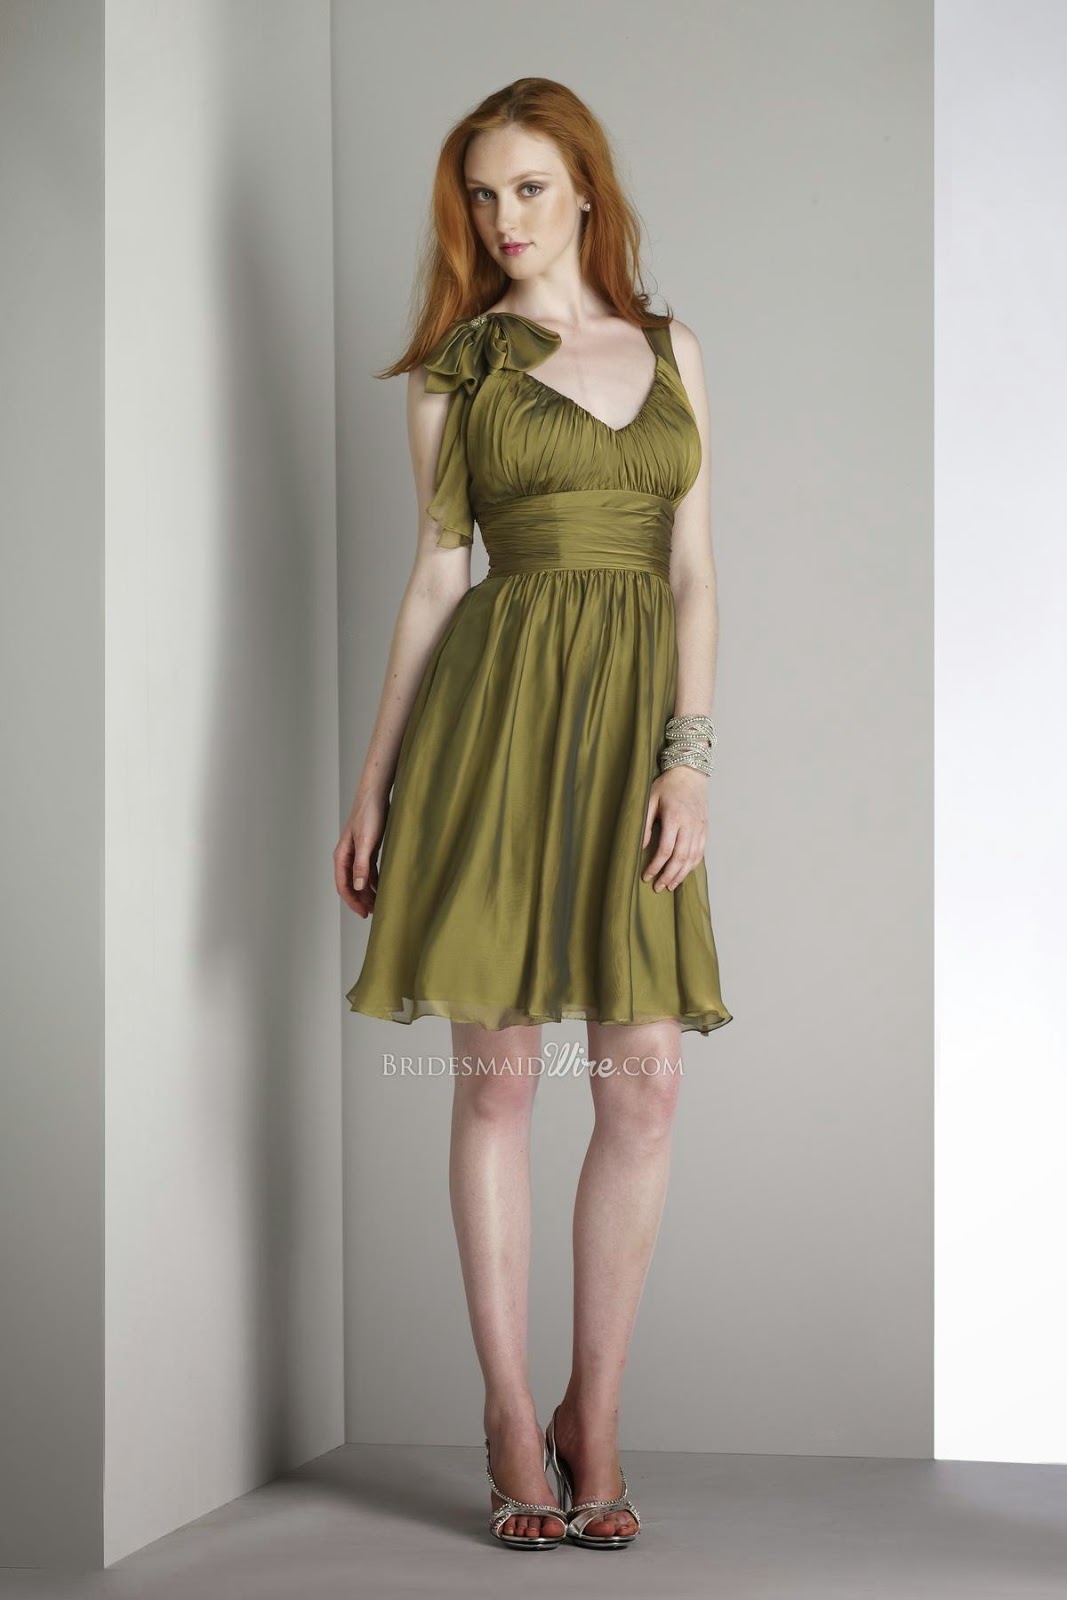 Shirred V-neck Olive Cocktail Bridesmaid Dress with Jeweled Centered Bow-1